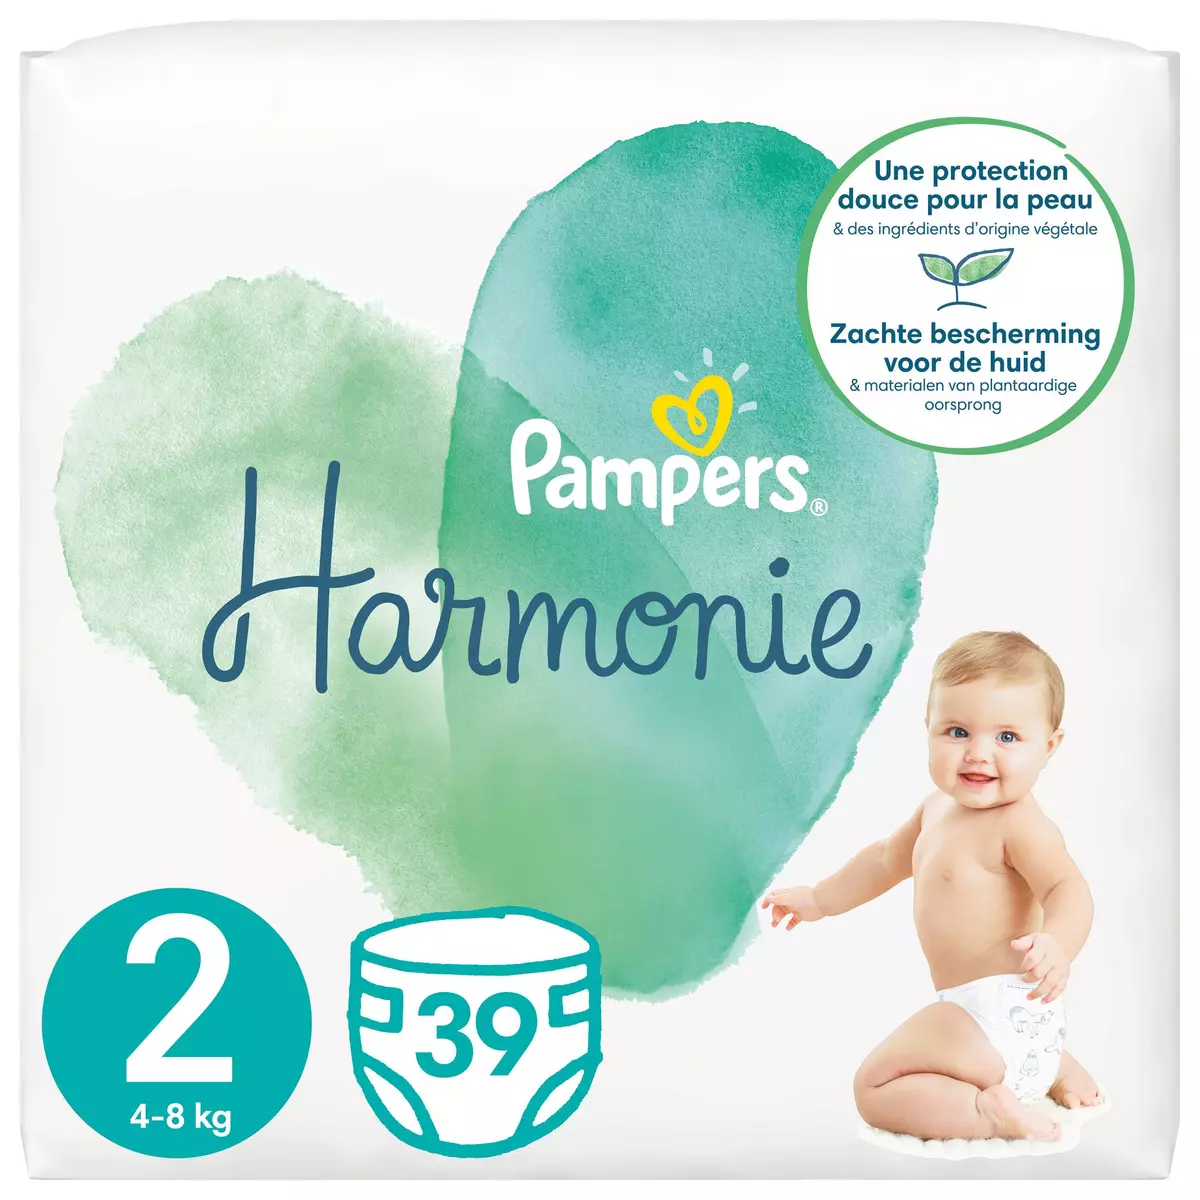 PAMPERS Harmonie couches taille 2 (4-8kg) 27 couches pas cher 